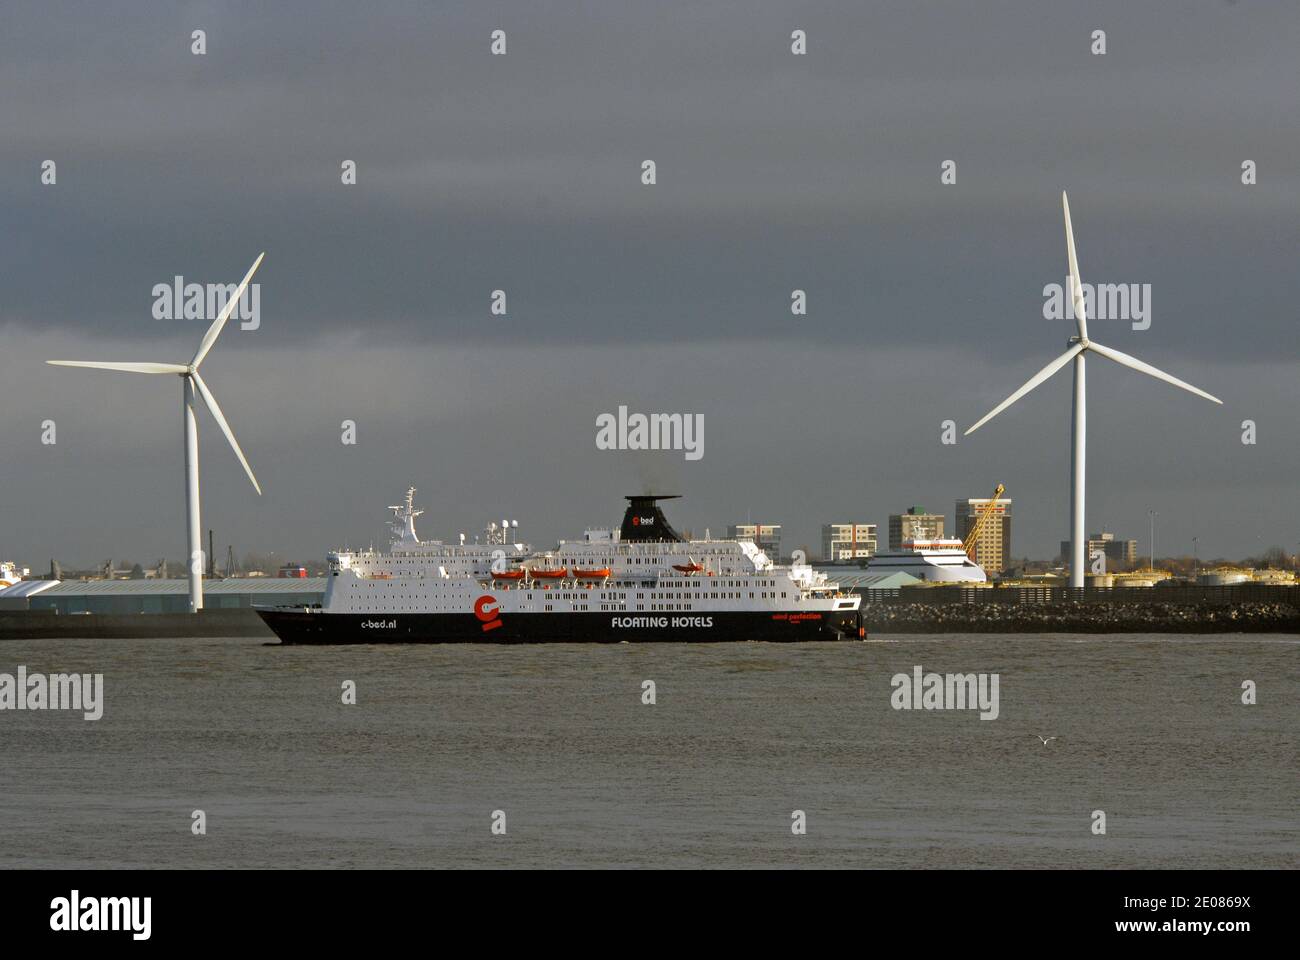 WIND PERFECTION, C-BED Floating Hotels largest accommodation ship, departs from LIVERPOOL outward for the WEST OF DUDDON SANDS WIND FARM, IRISH SEA. Stock Photo